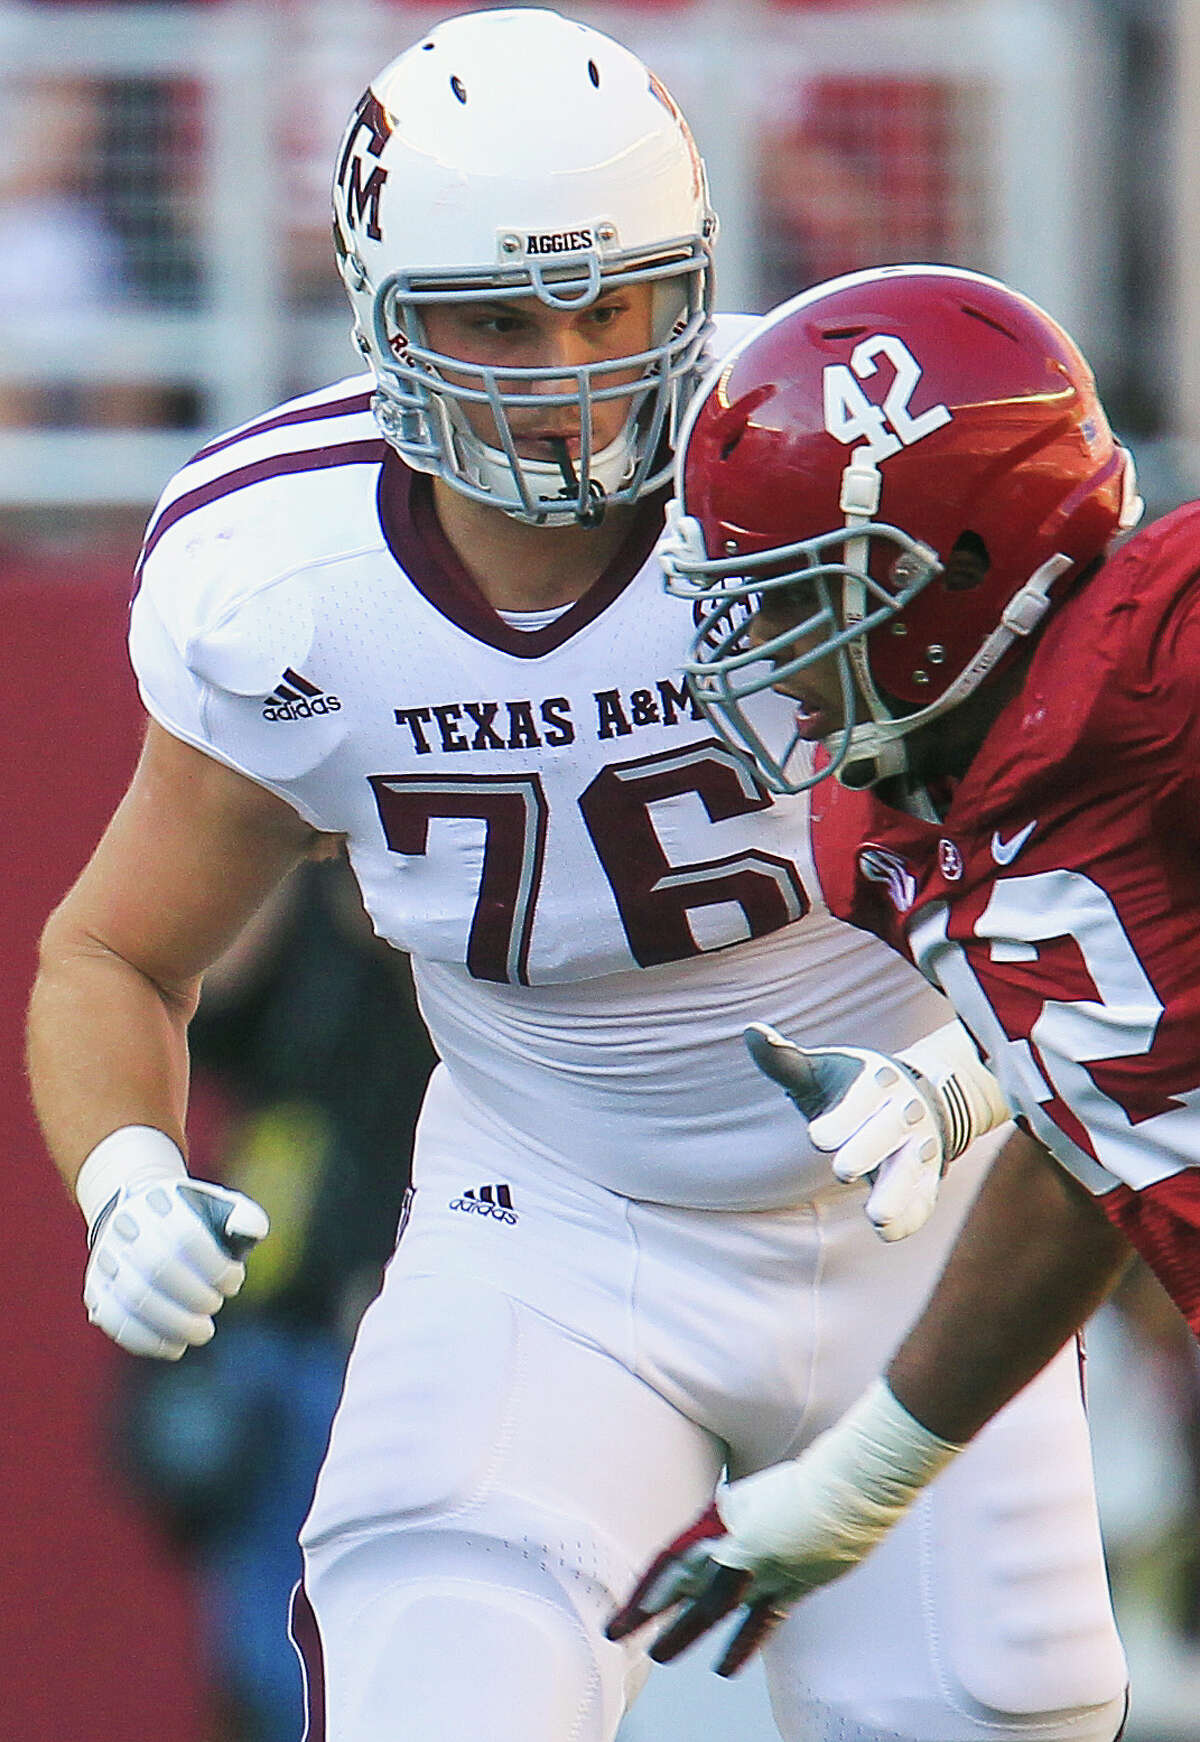 Tackle Luke Joeckel was one of the building blocks for A&M's prolific offense this season.